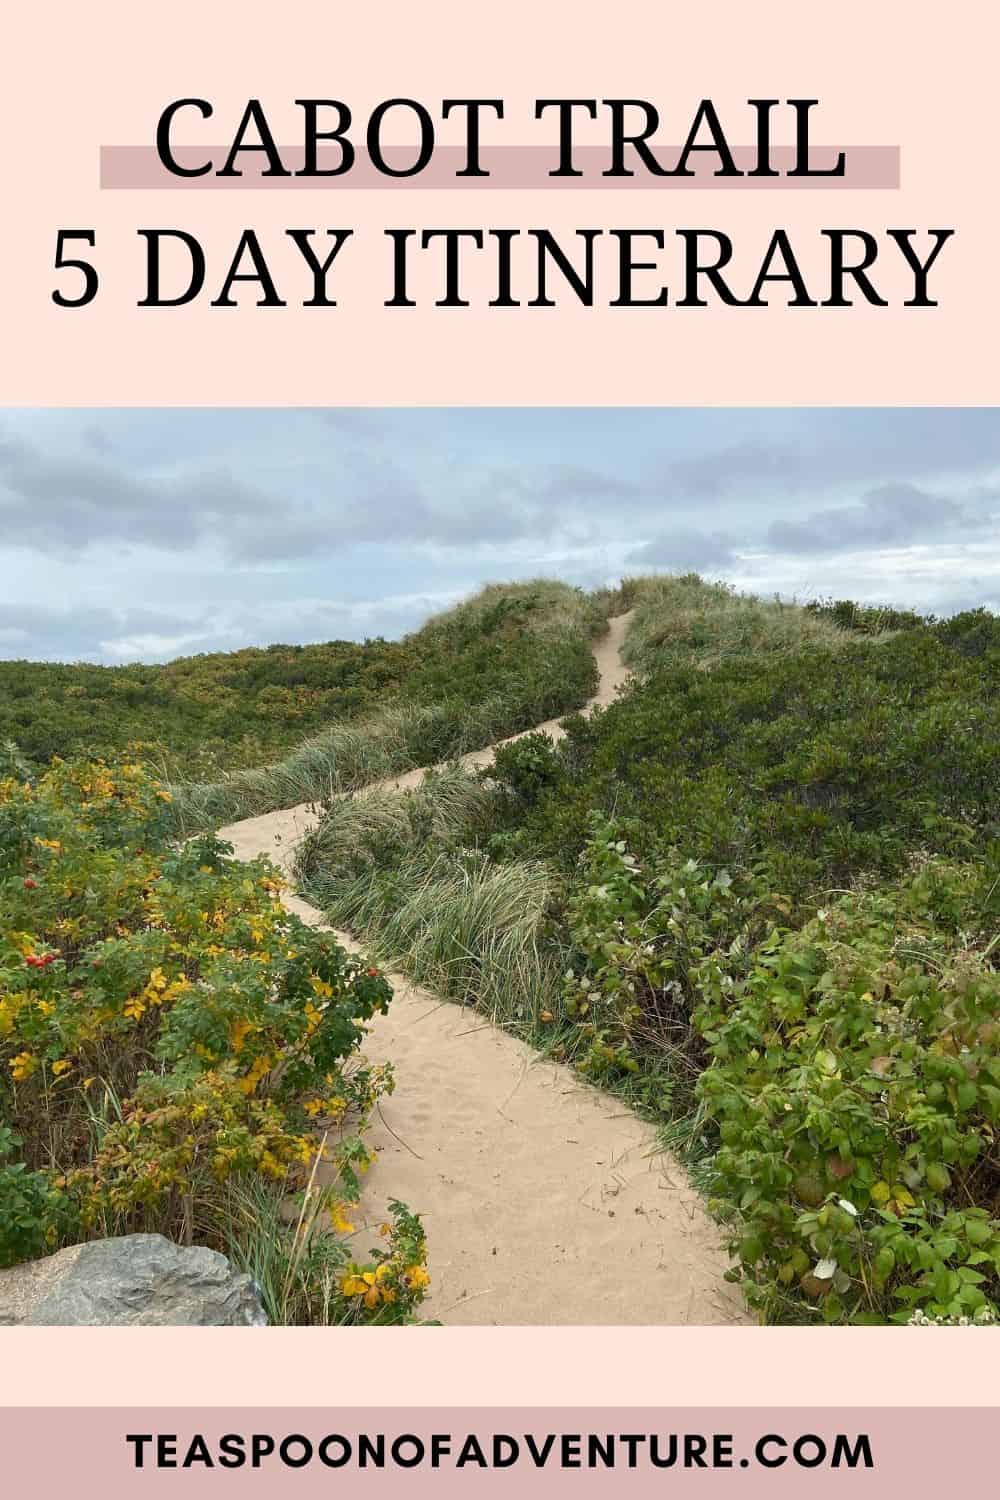 CAPE BRETON ISLAND, NOVA SCOTIA: Check out how to spend 5 days on Cape Breton Island with my Cabot Trail itinerary! Where to stay, when to go, what to see and more on the Cabot Trail! #cabottrail #capebreton #capebretonisland #roadtrip #travel #novascotia #canada #travelcanada